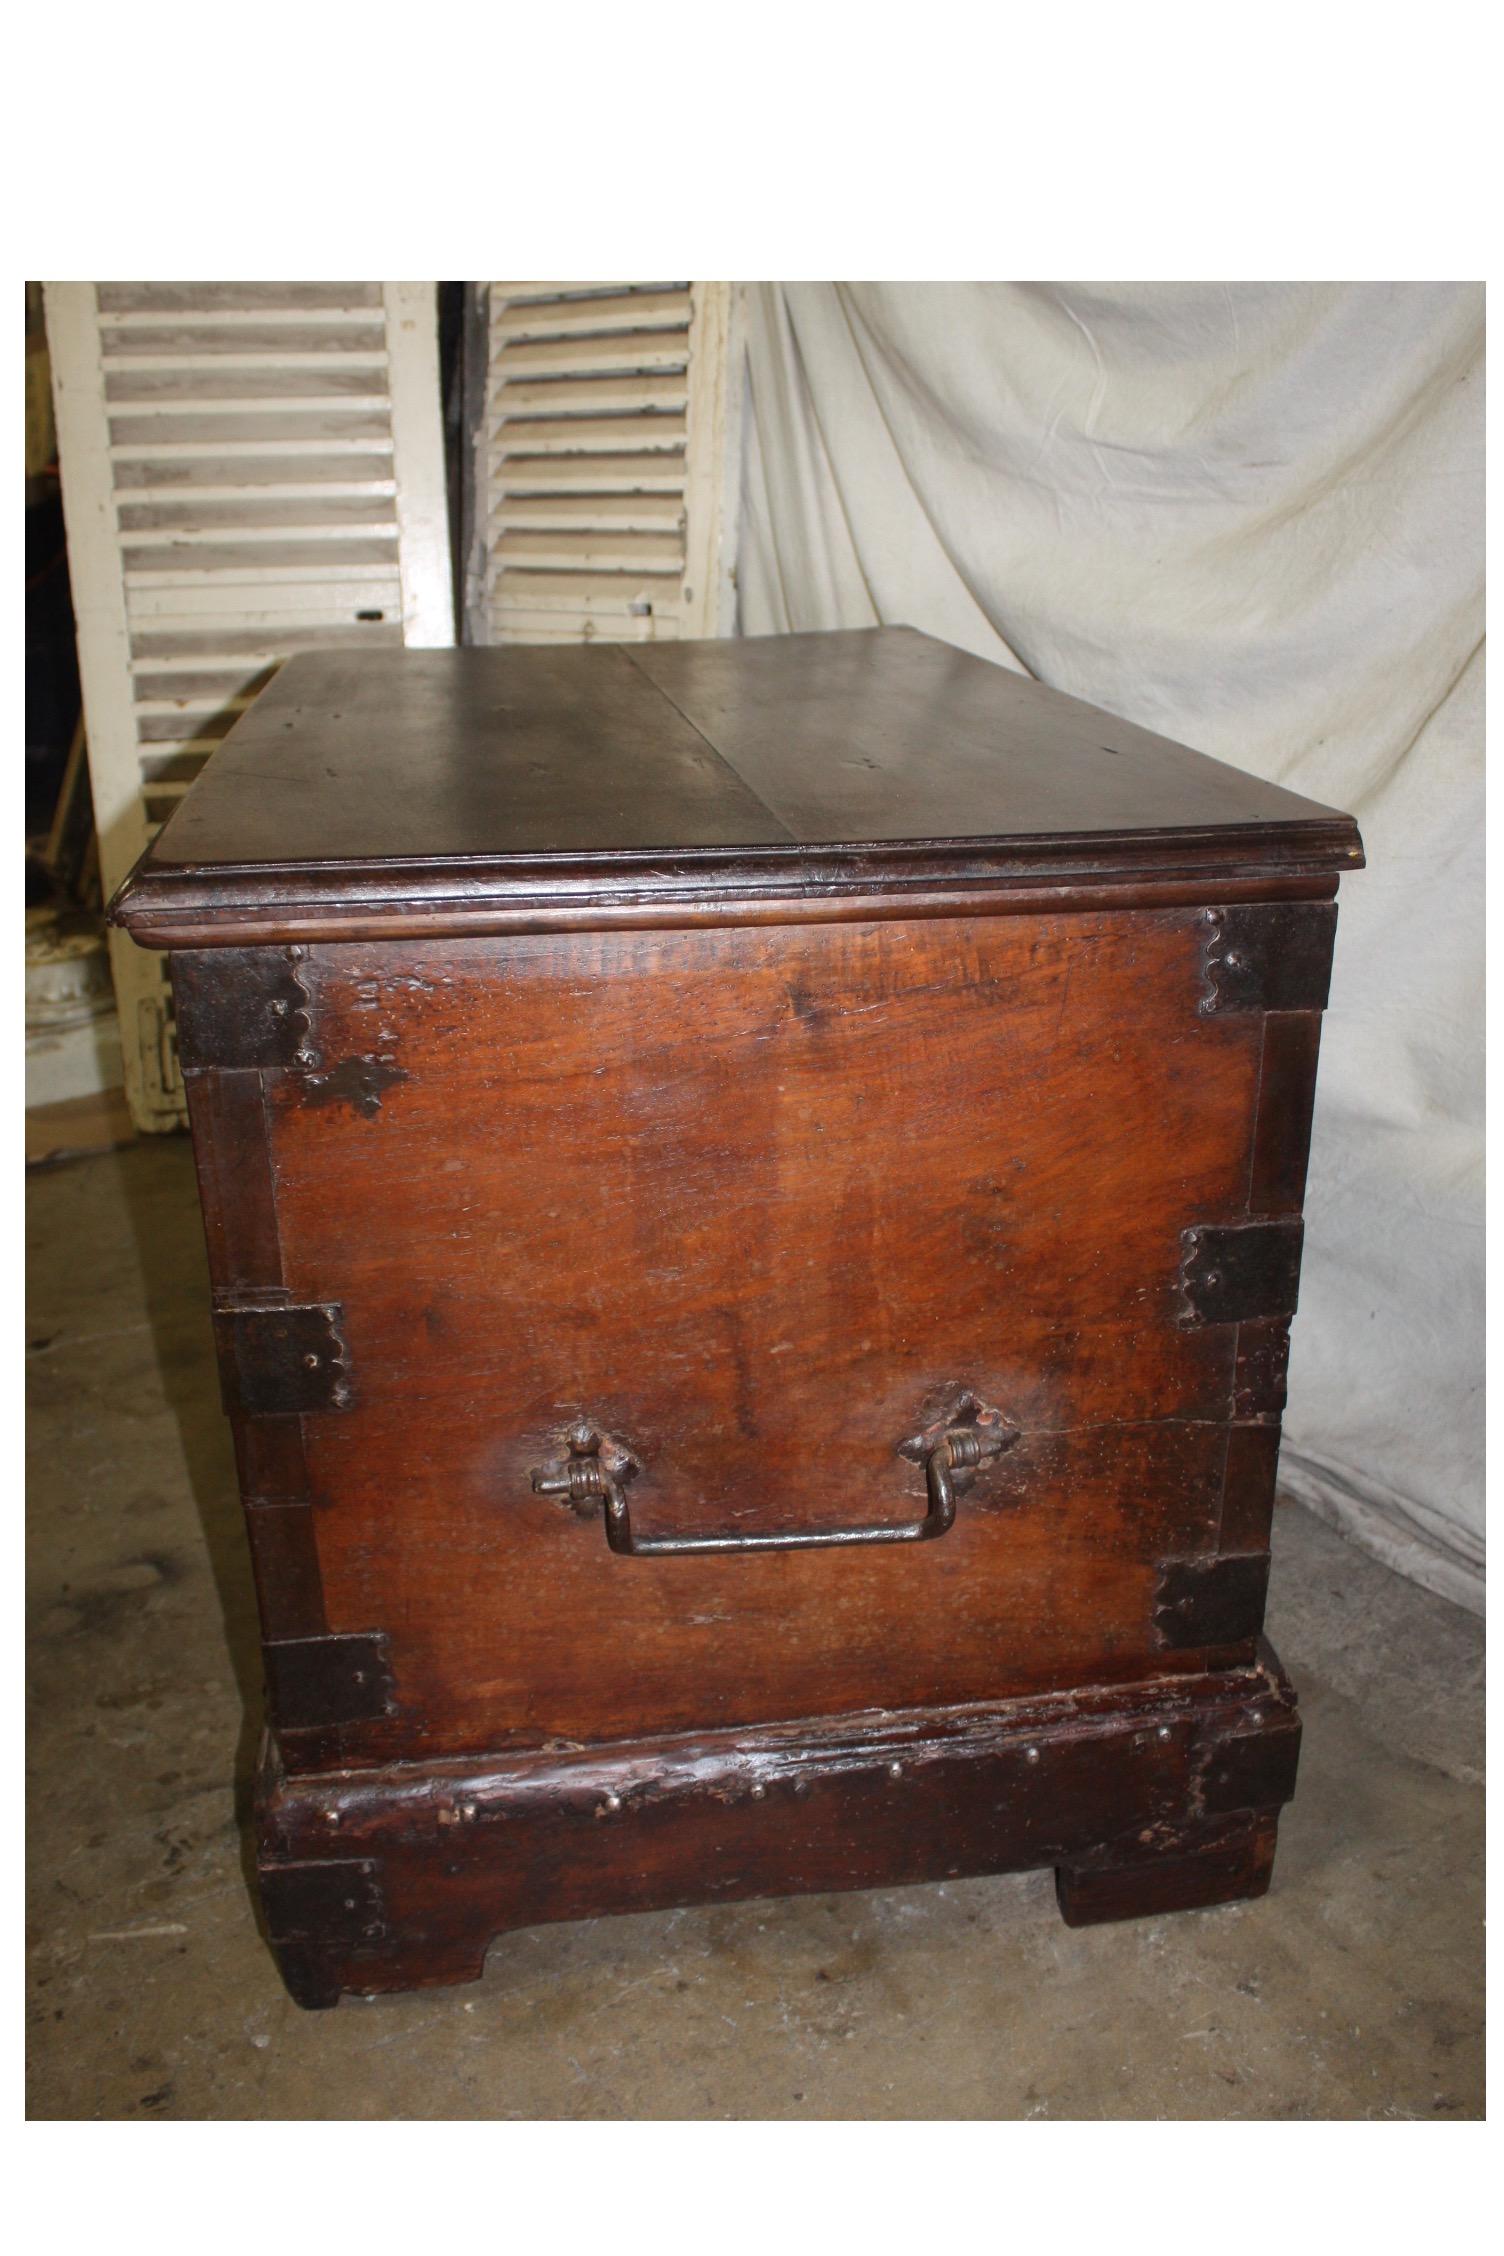 Louis XIV Superbe 17th Century French Blanket Chest or Trunk For Sale